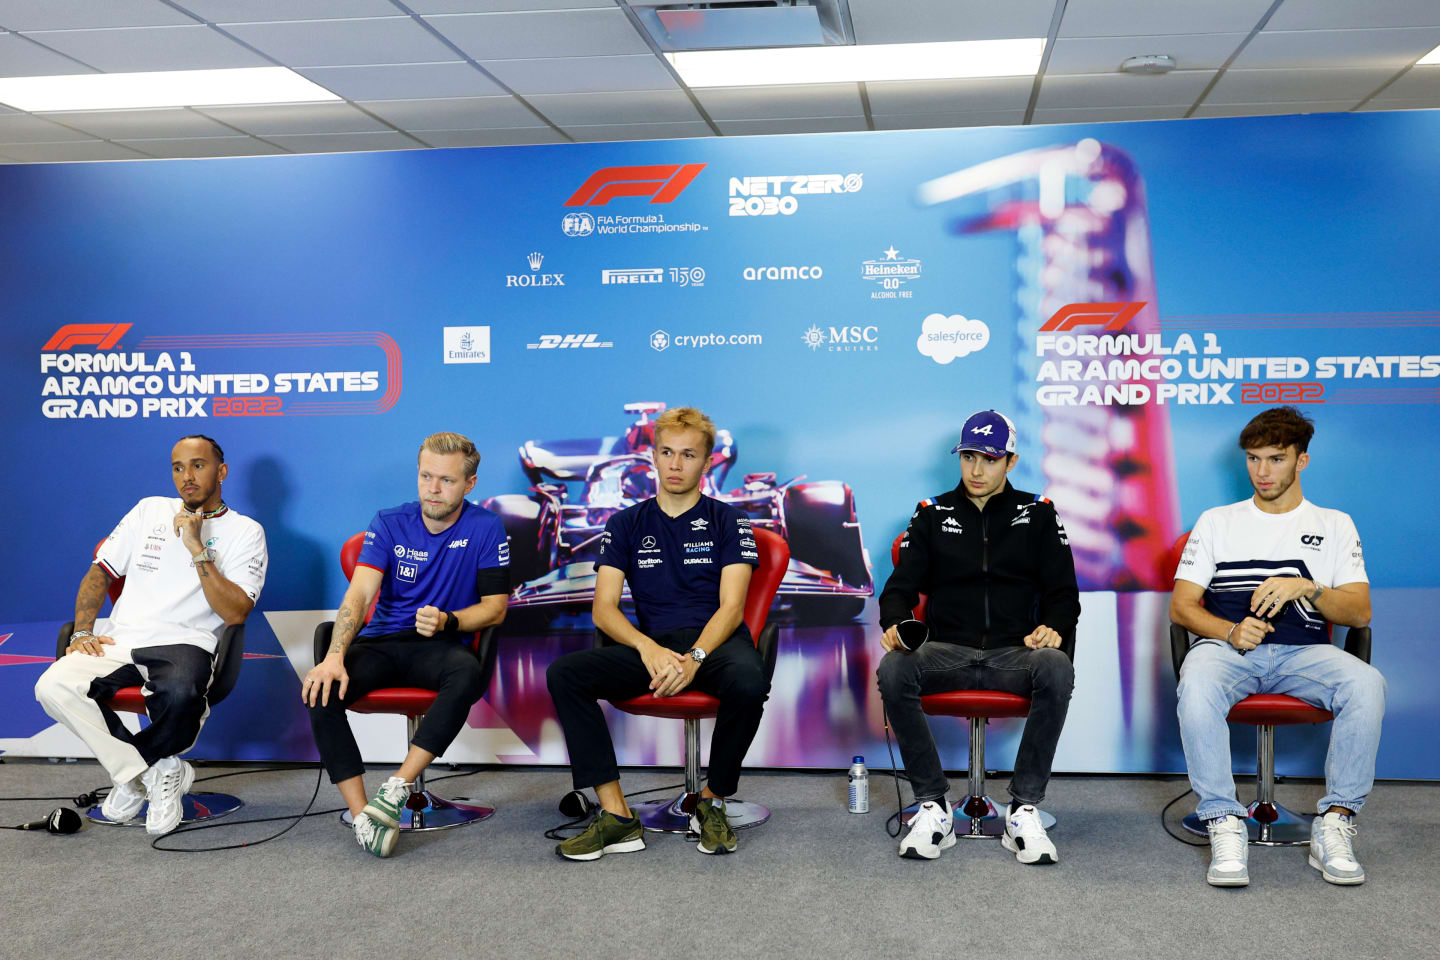 AUSTIN, TEXAS - OCTOBER 20: (L-R) Lewis Hamilton of Great Britain and Mercedes, Kevin Magnussen of Denmark and Haas F1, Alexander Albon of Thailand and Williams, Esteban Ocon of France and Alpine F1 and Pierre Gasly of France and Scuderia AlphaTauri attend the Drivers Press Conference during previews ahead of the F1 Grand Prix of USA at Circuit of The Americas on October 20, 2022 in Austin, Texas. (Photo by Jared C. Tilton/Getty Images)